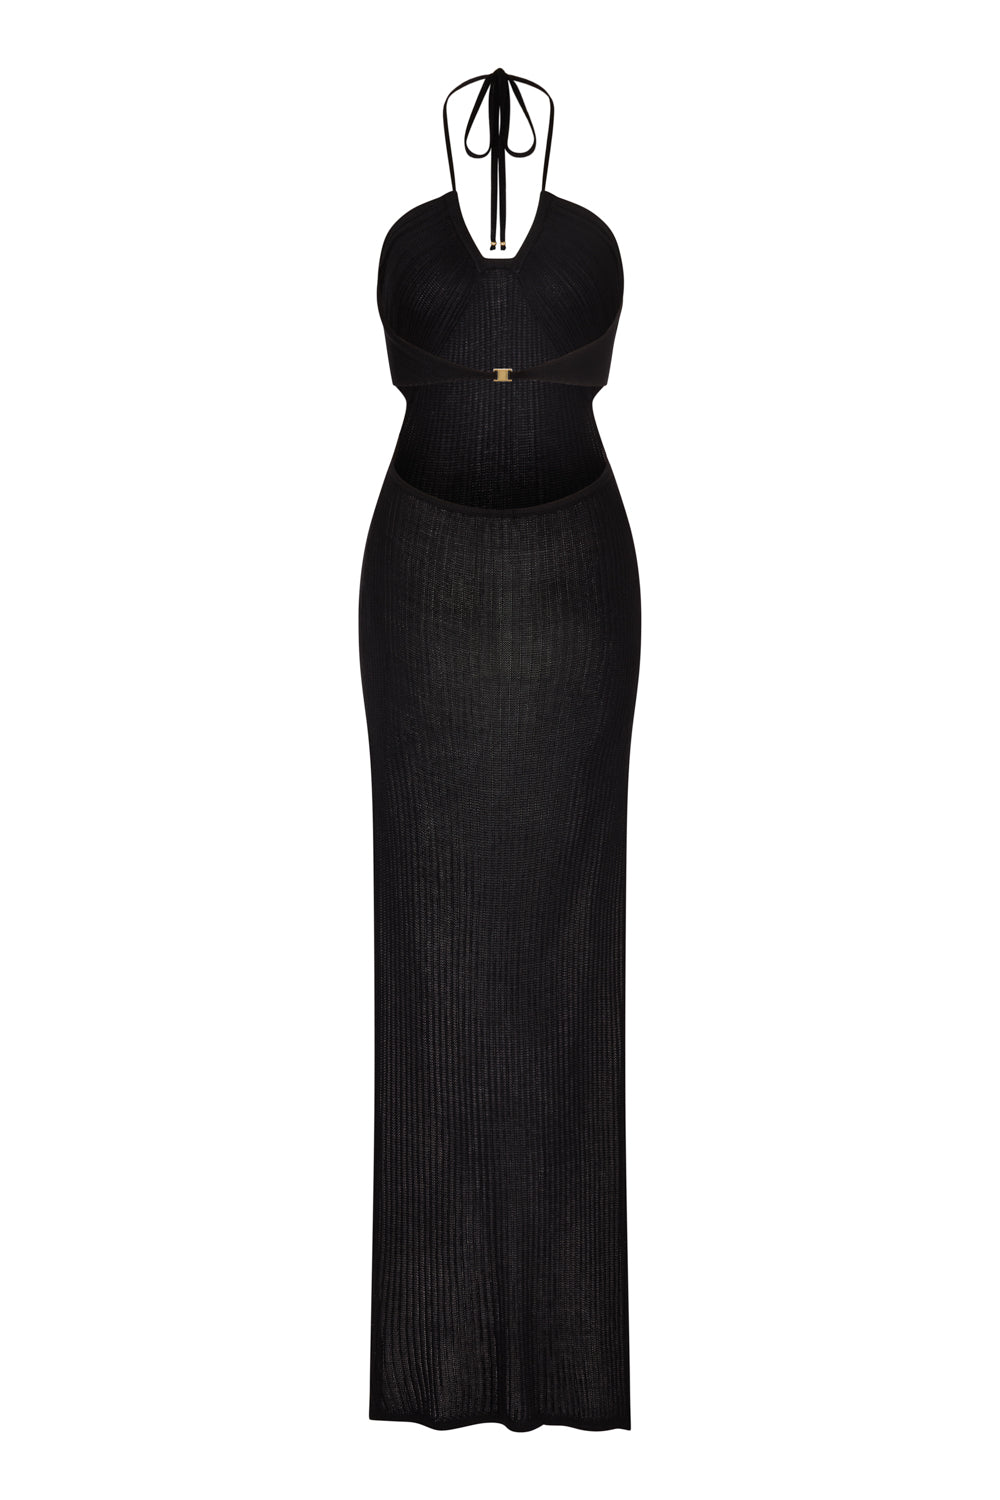 flook the label sia dress black knit product image back